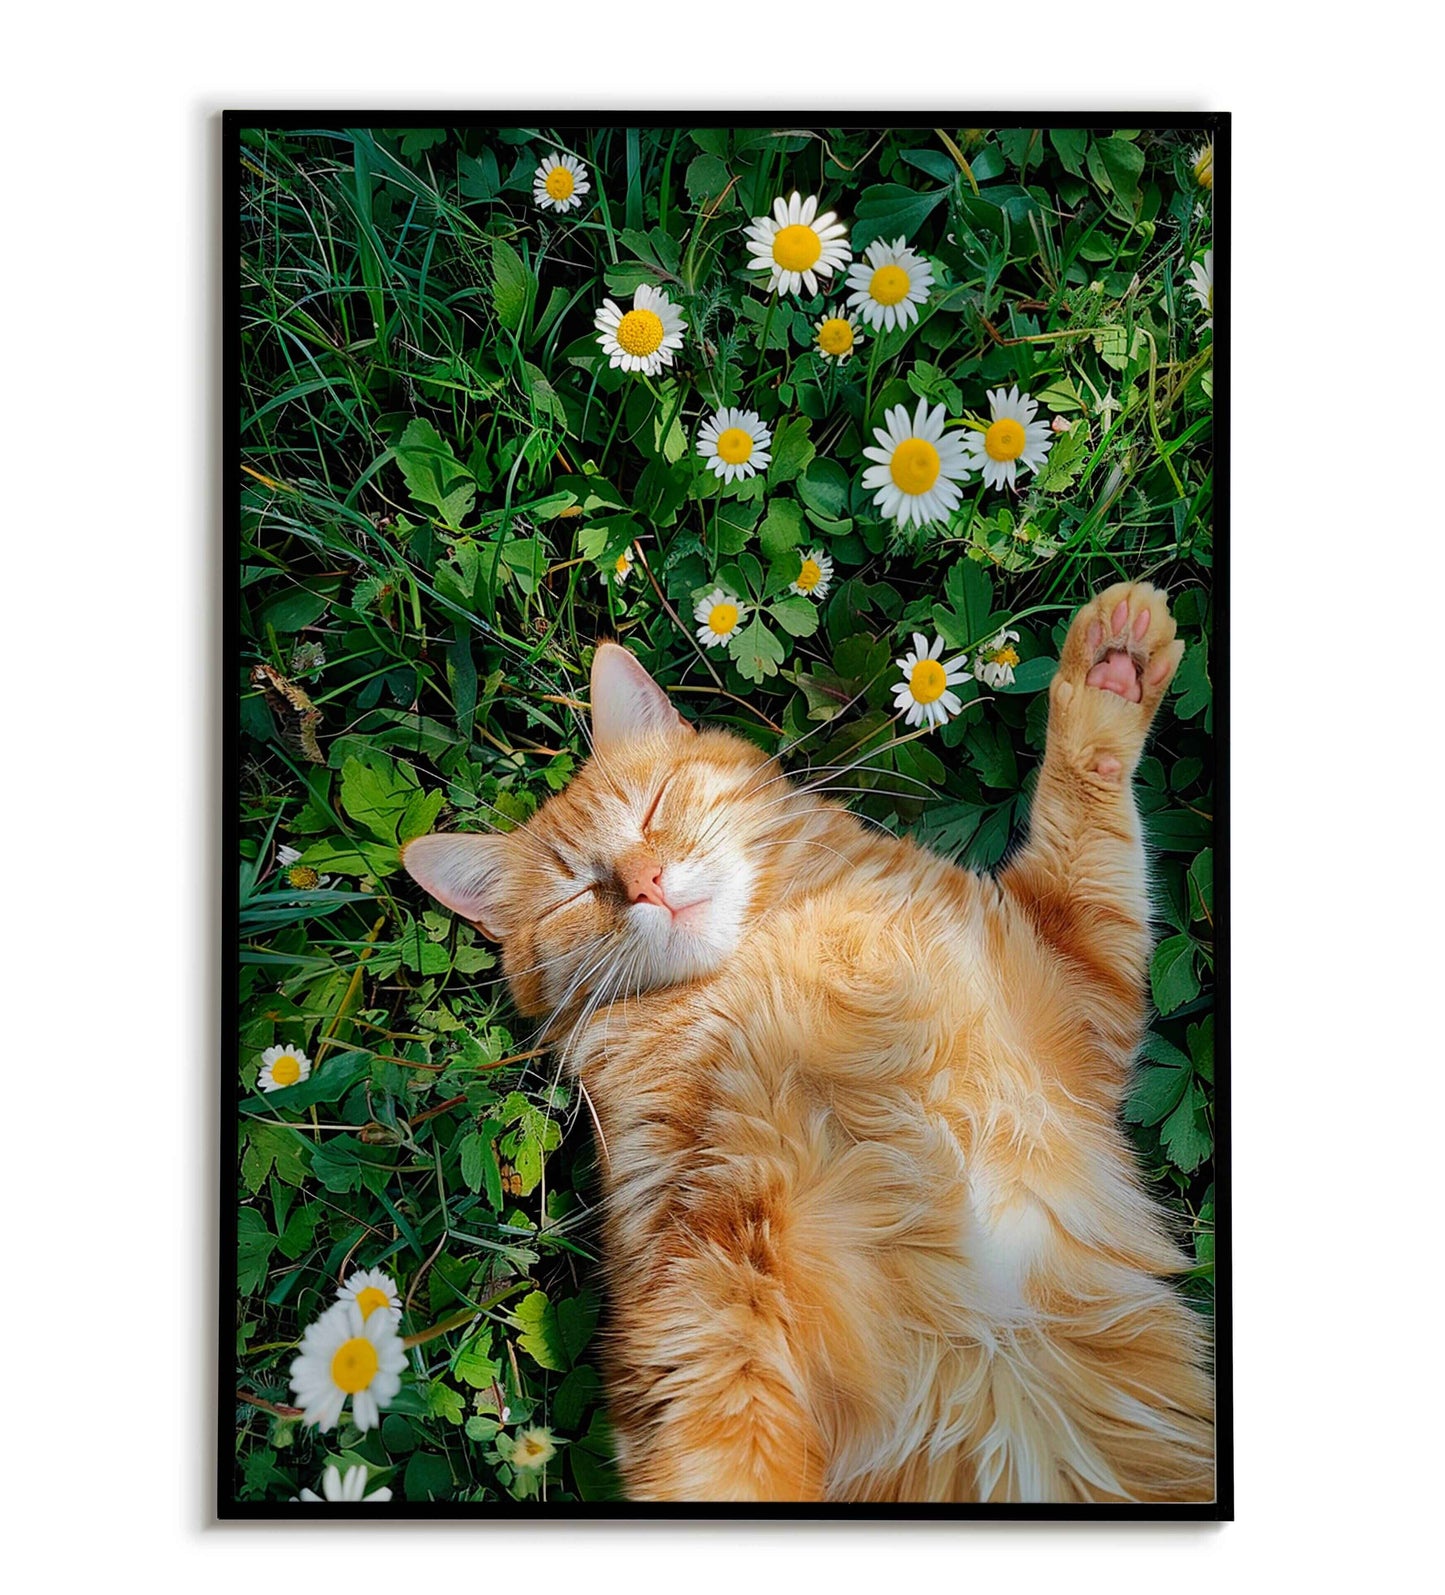 Catnap(2 of 2) printable poster. Available for purchase as a physical poster or digital download